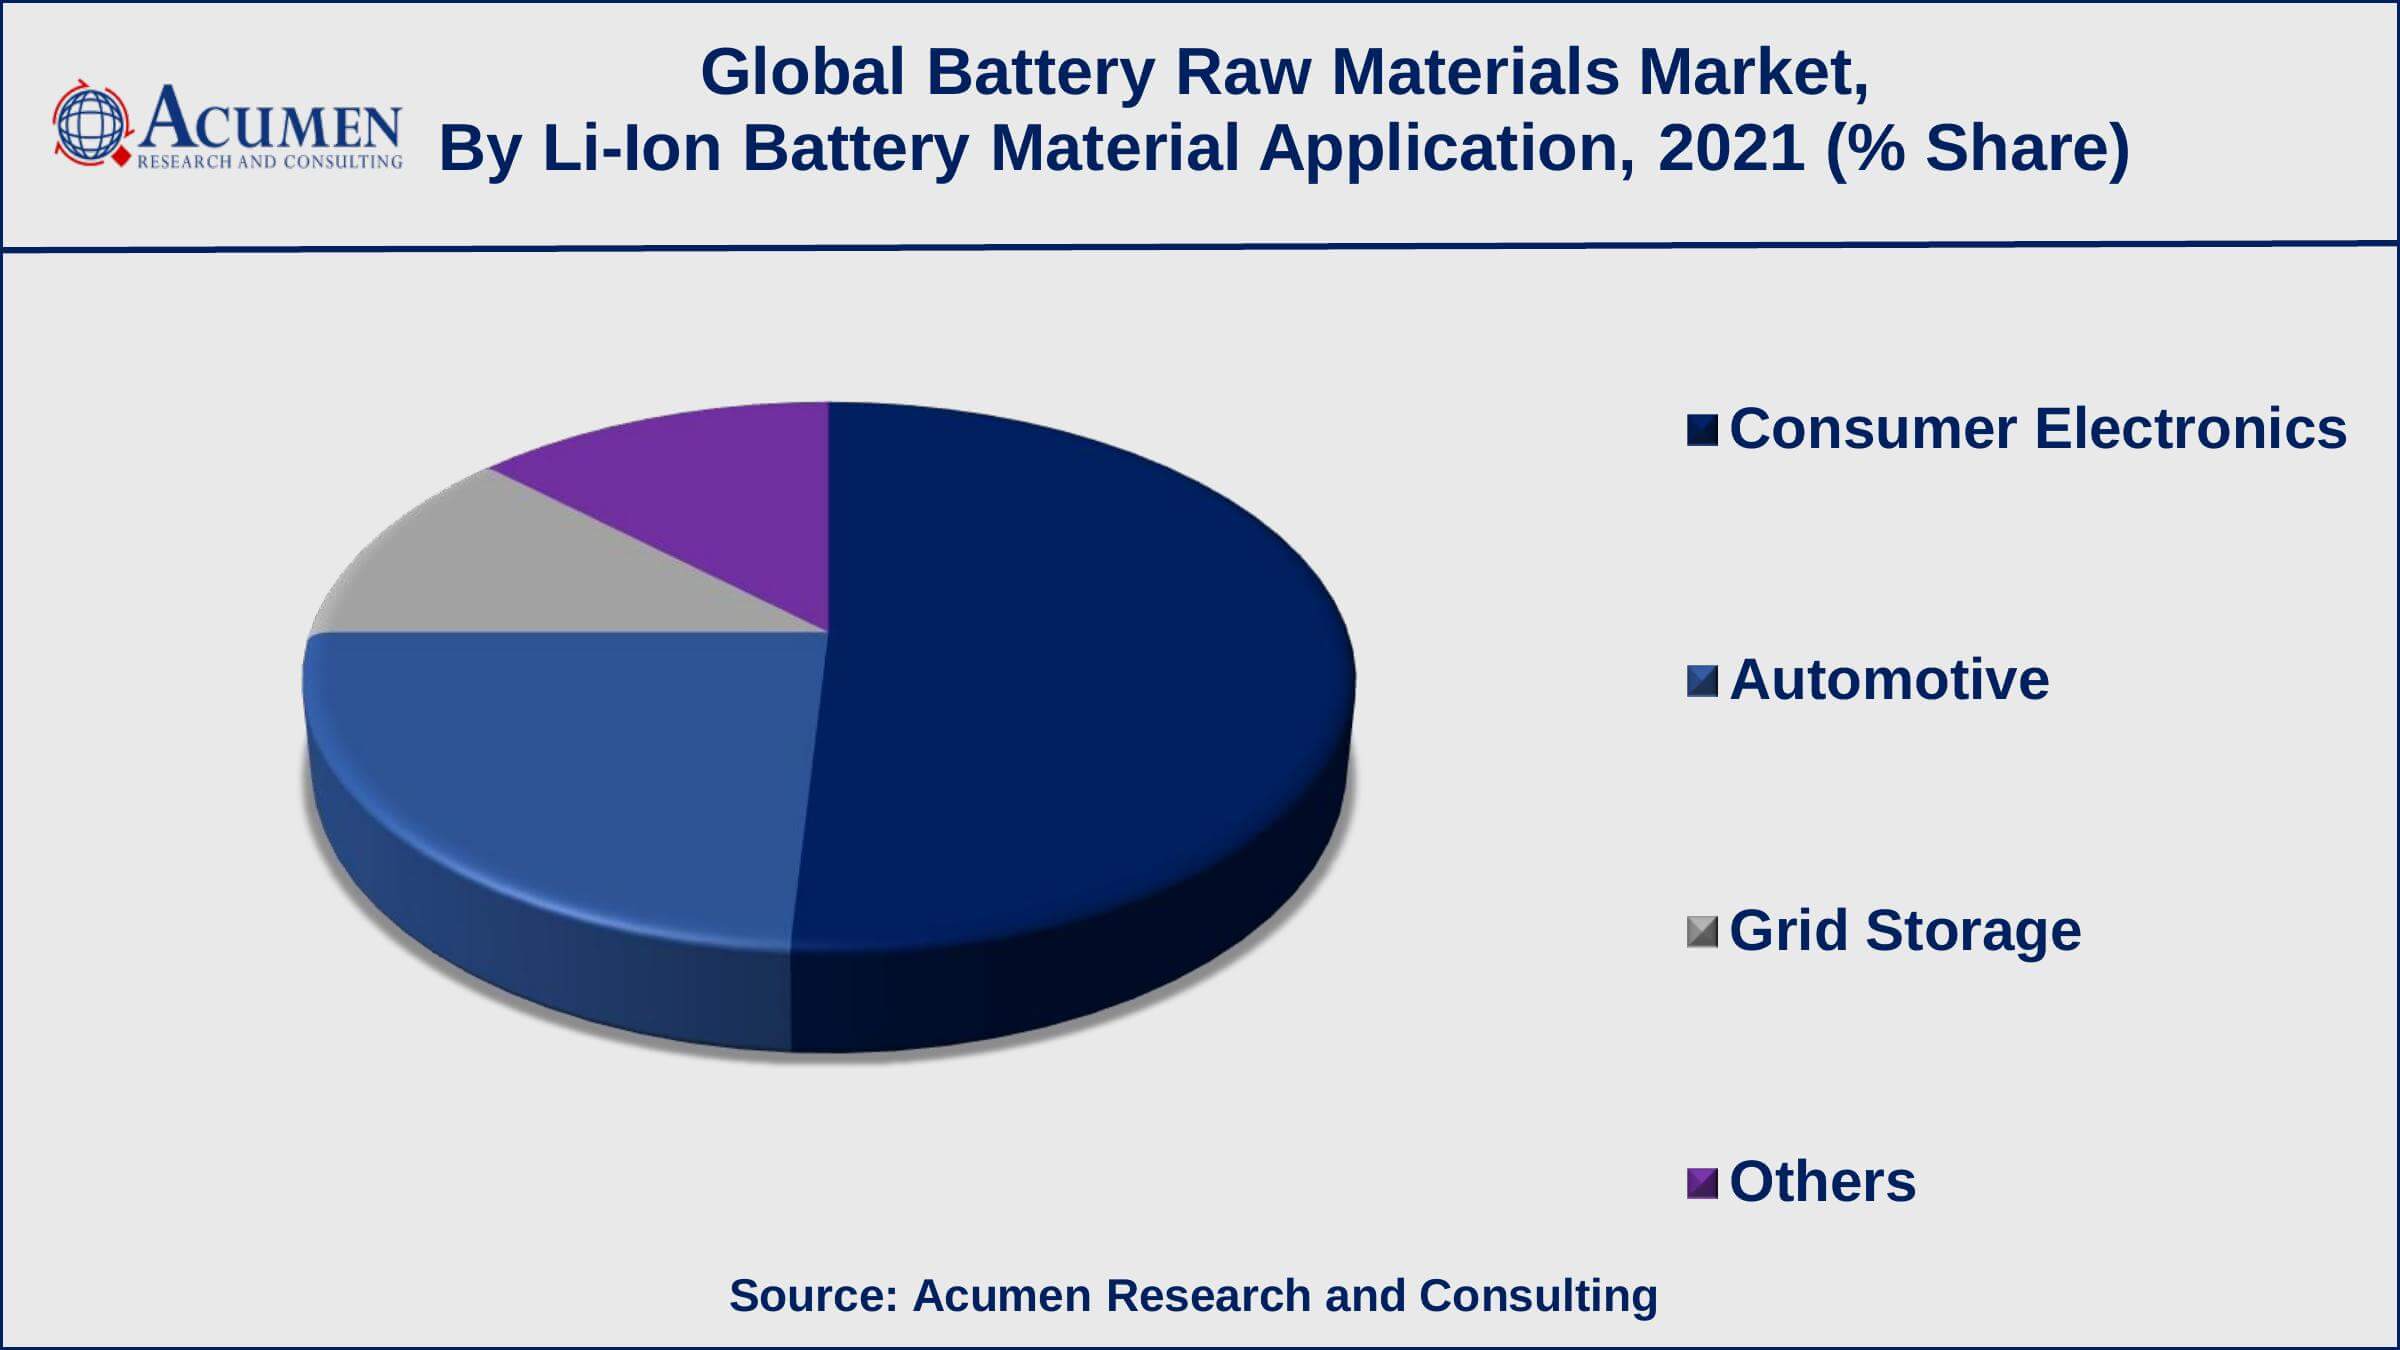 Among li-ion battery material application, consumer electronics generated shares of over 51% in 2021